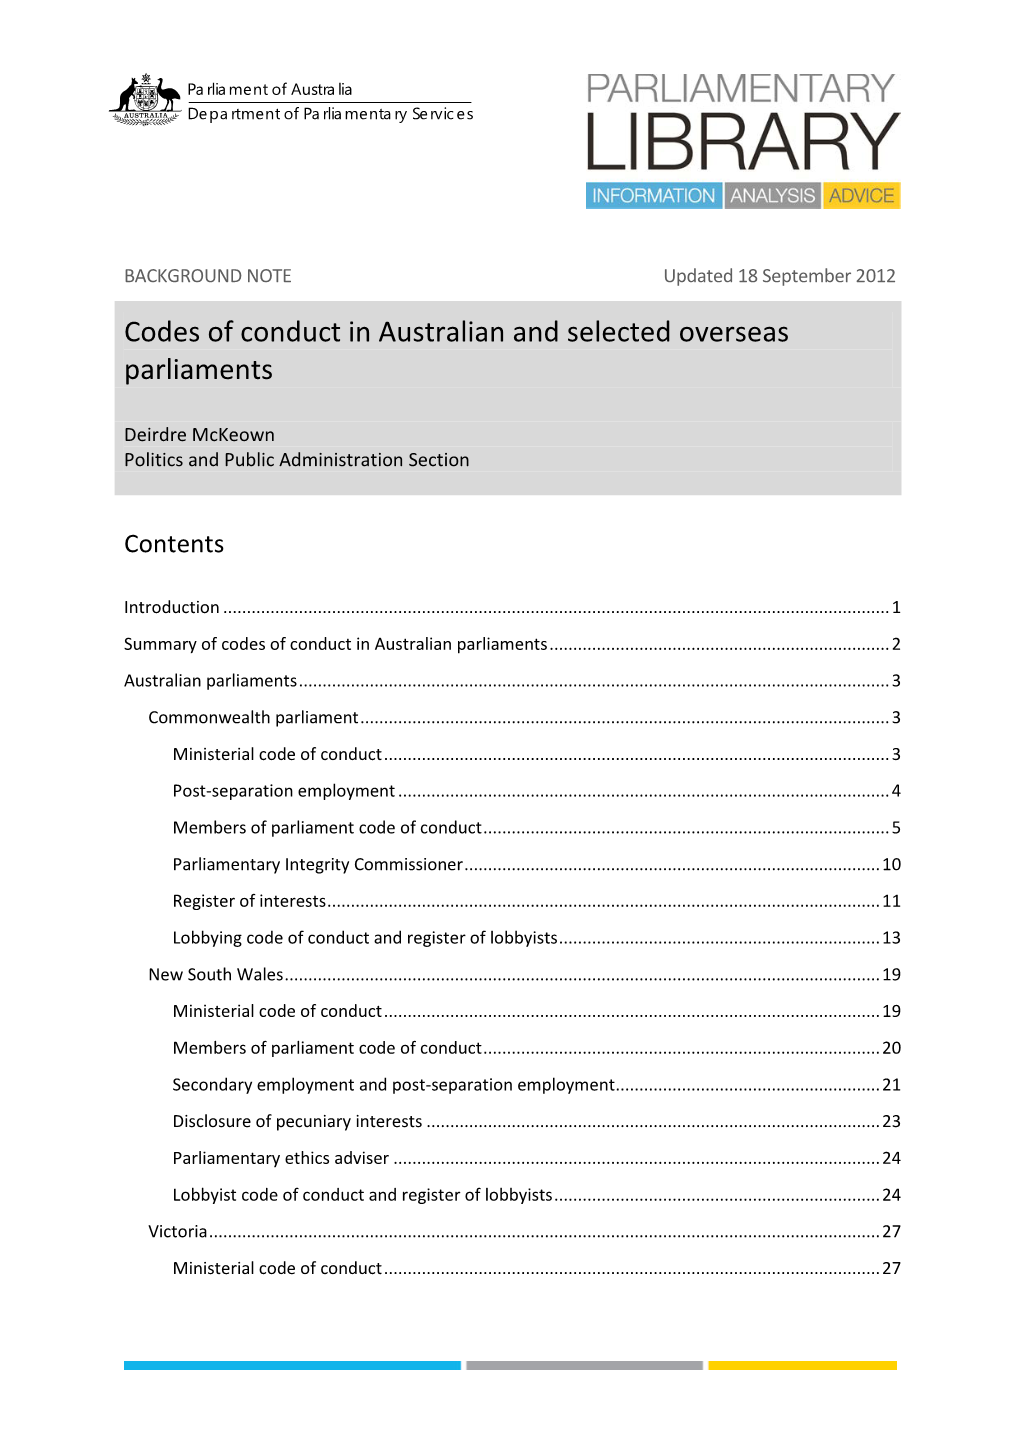 Codes of Conduct in Australian and Selected Overseas Parliaments